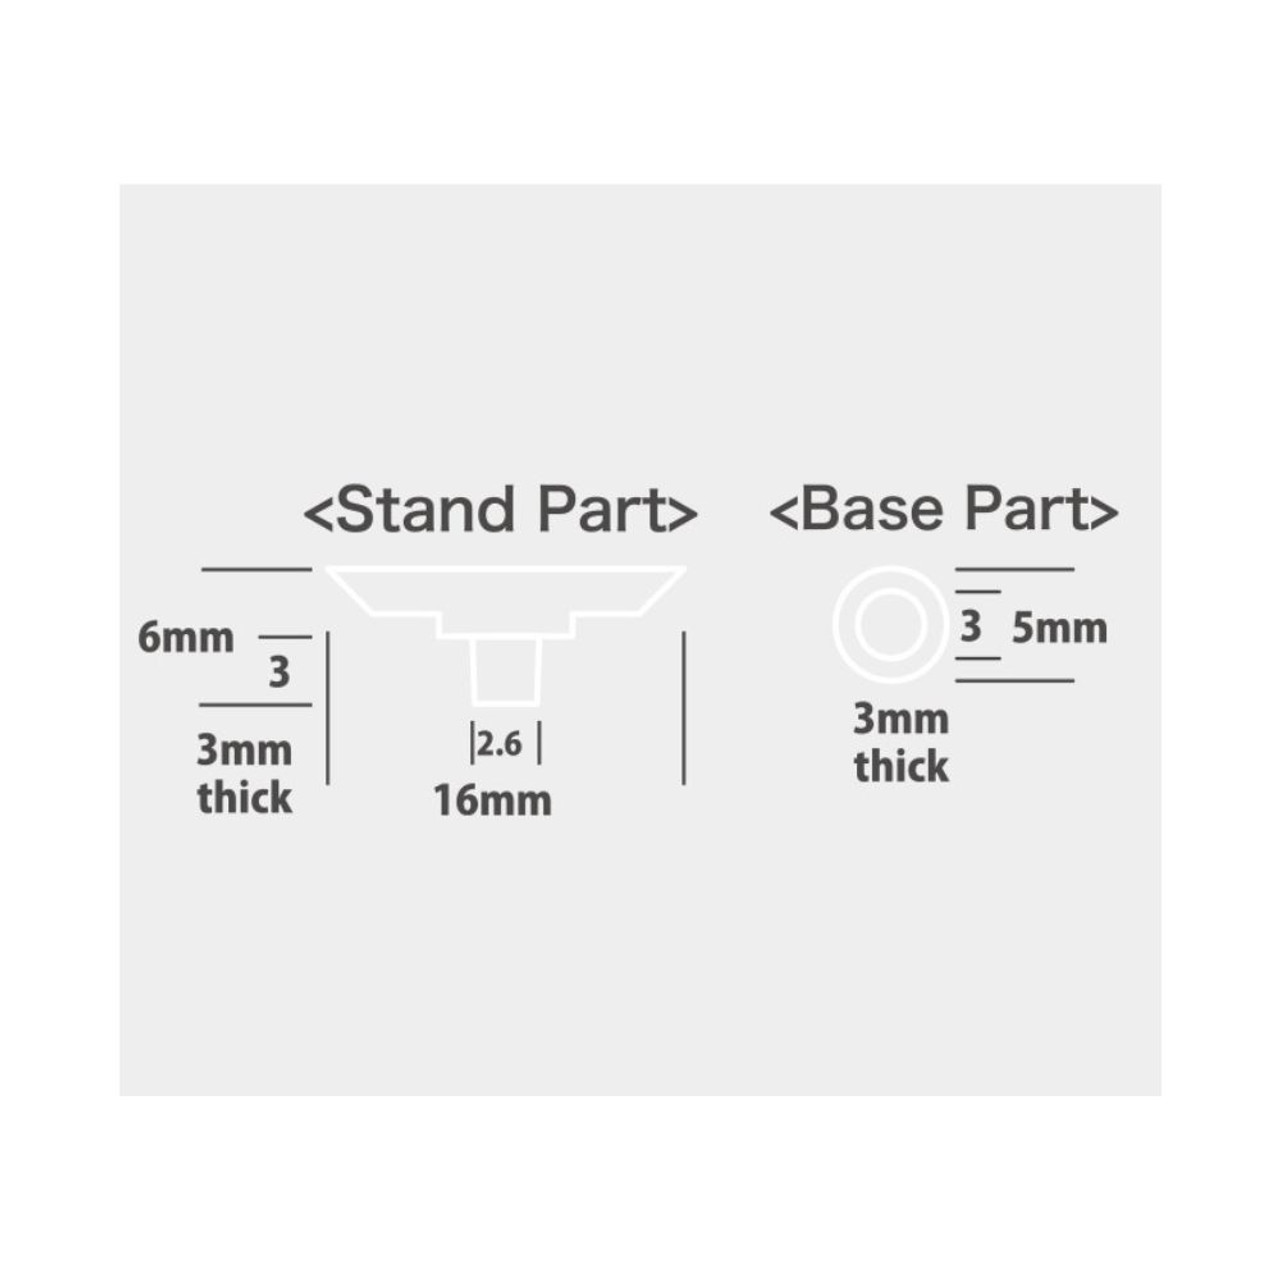 Parts of rotating stand